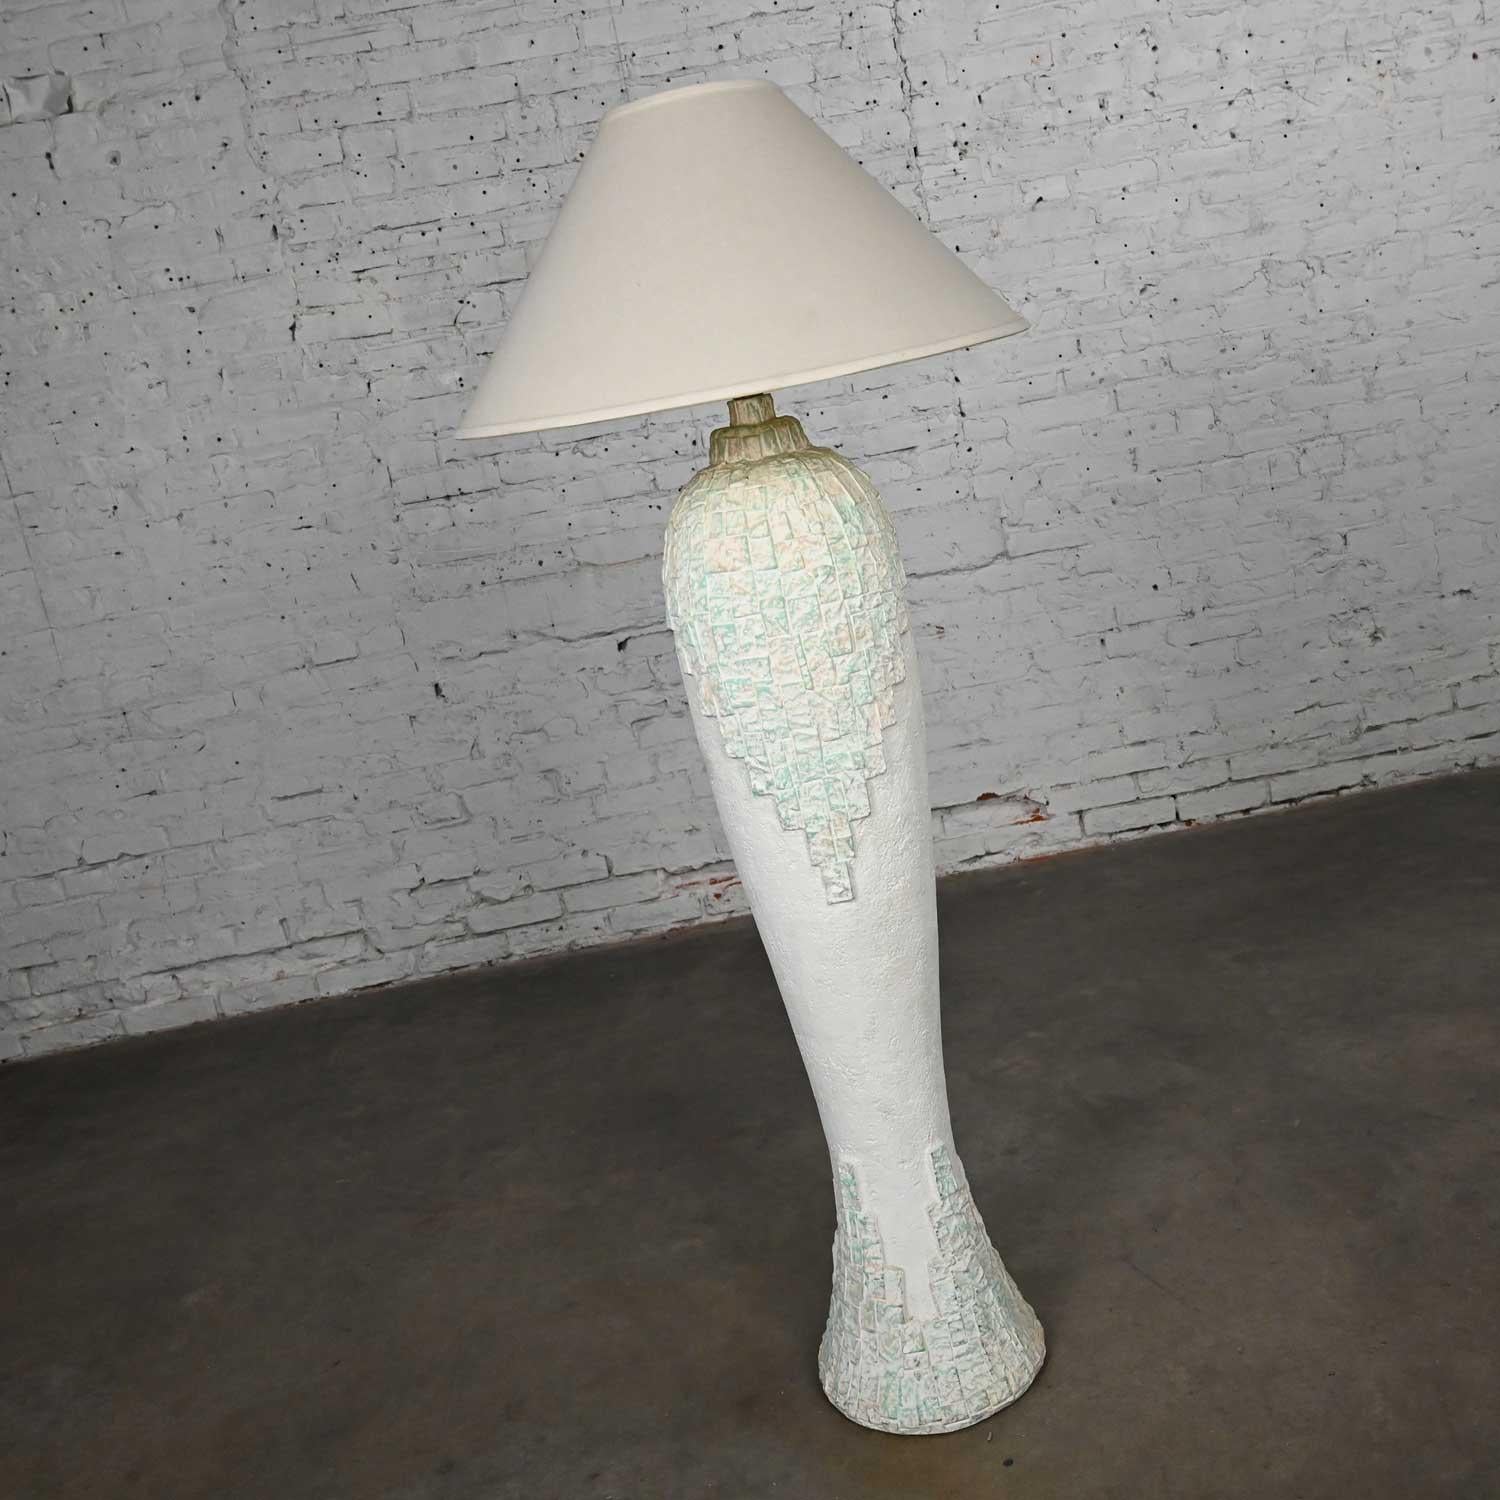 Incredible vintage modern to postmodern southwest style textured sculptural plaster floor lamp with its original beige linen-like coolie shade. Beautiful condition, keeping in mind that this is vintage and not new so will have signs of use and wear.